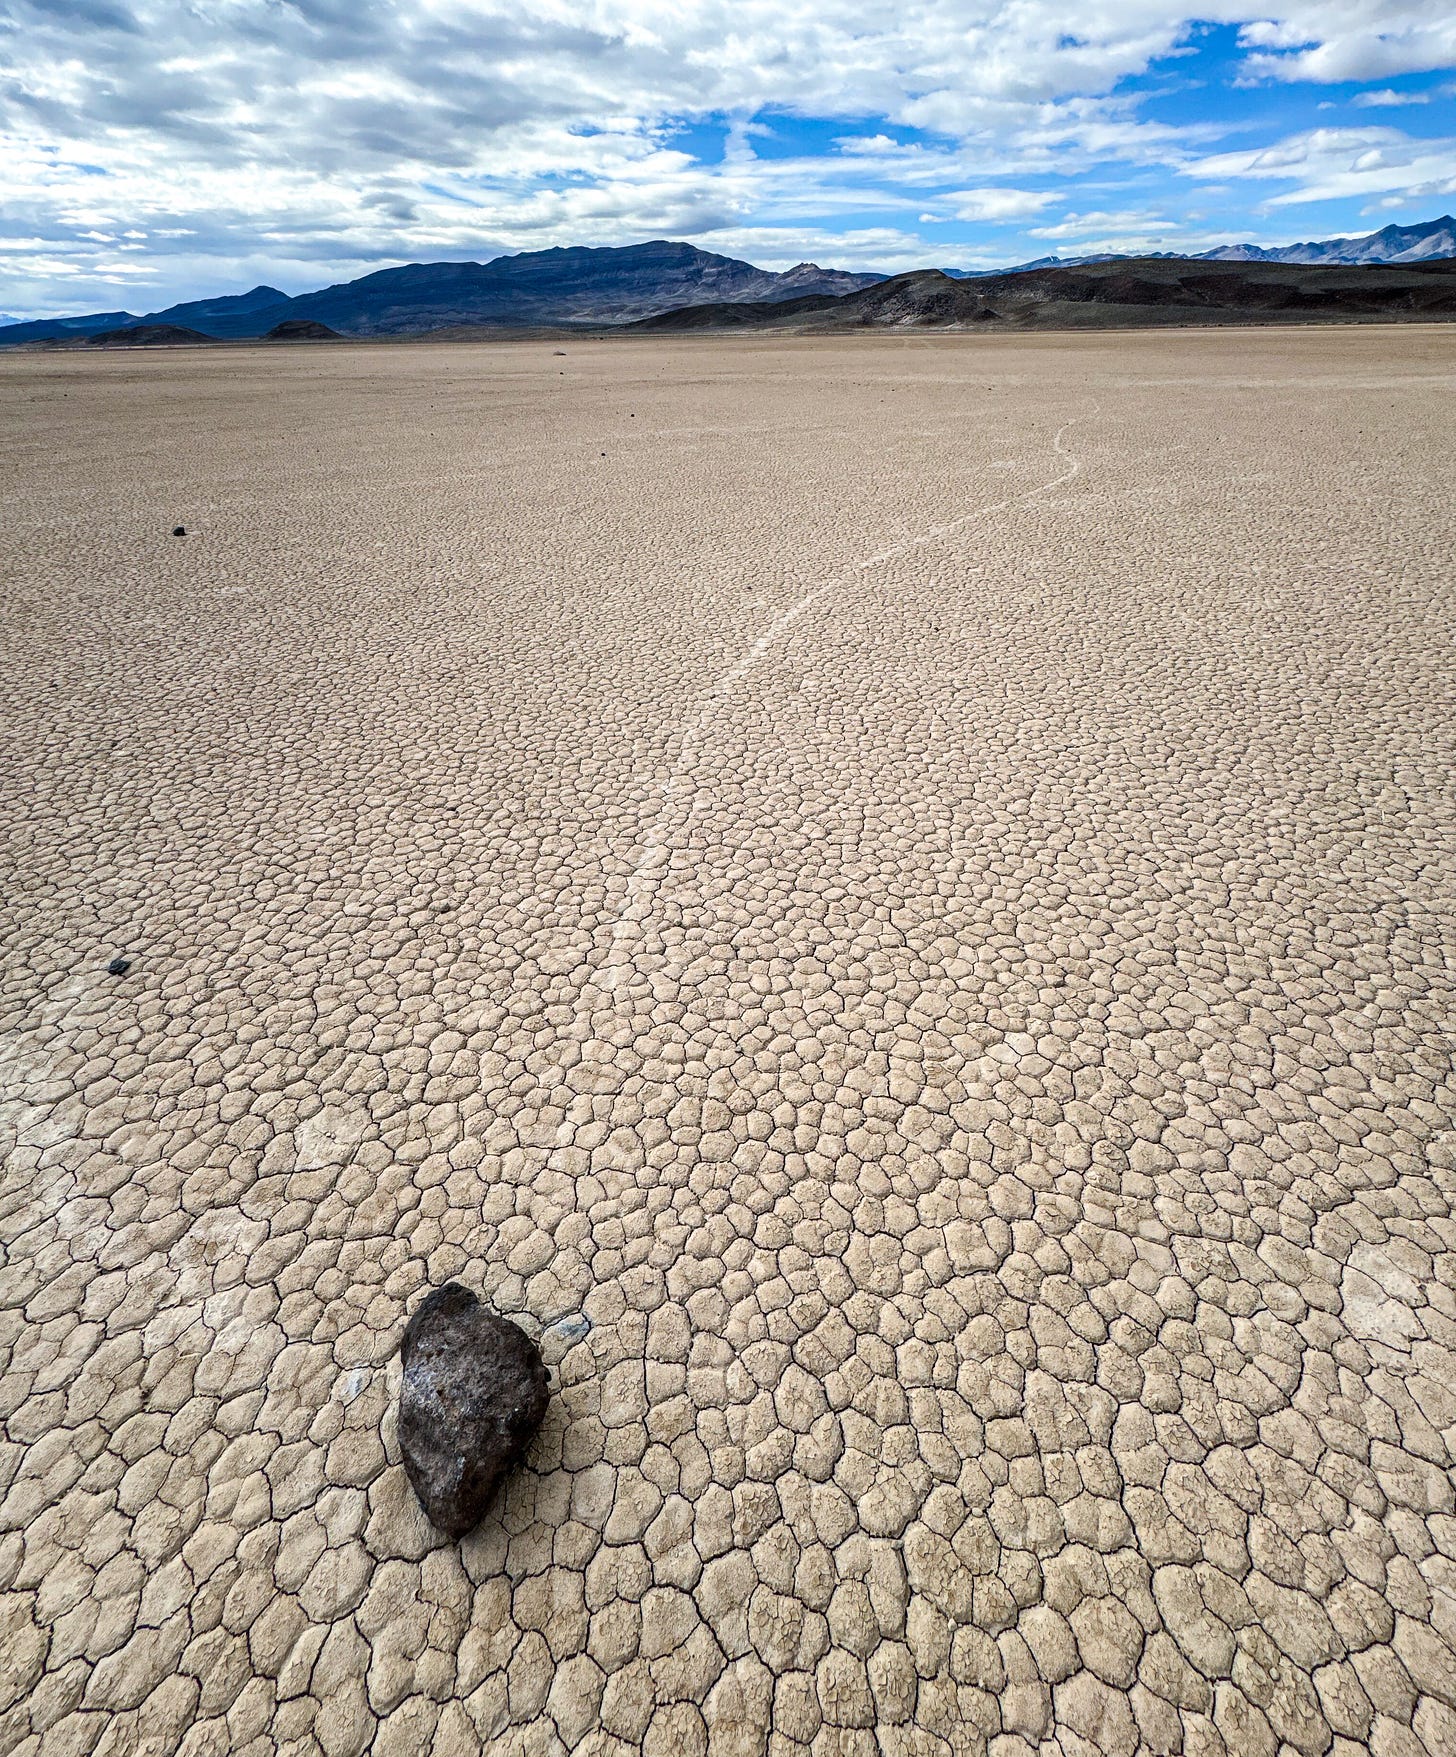 Dry lake bed with clouds and mountains in distance.